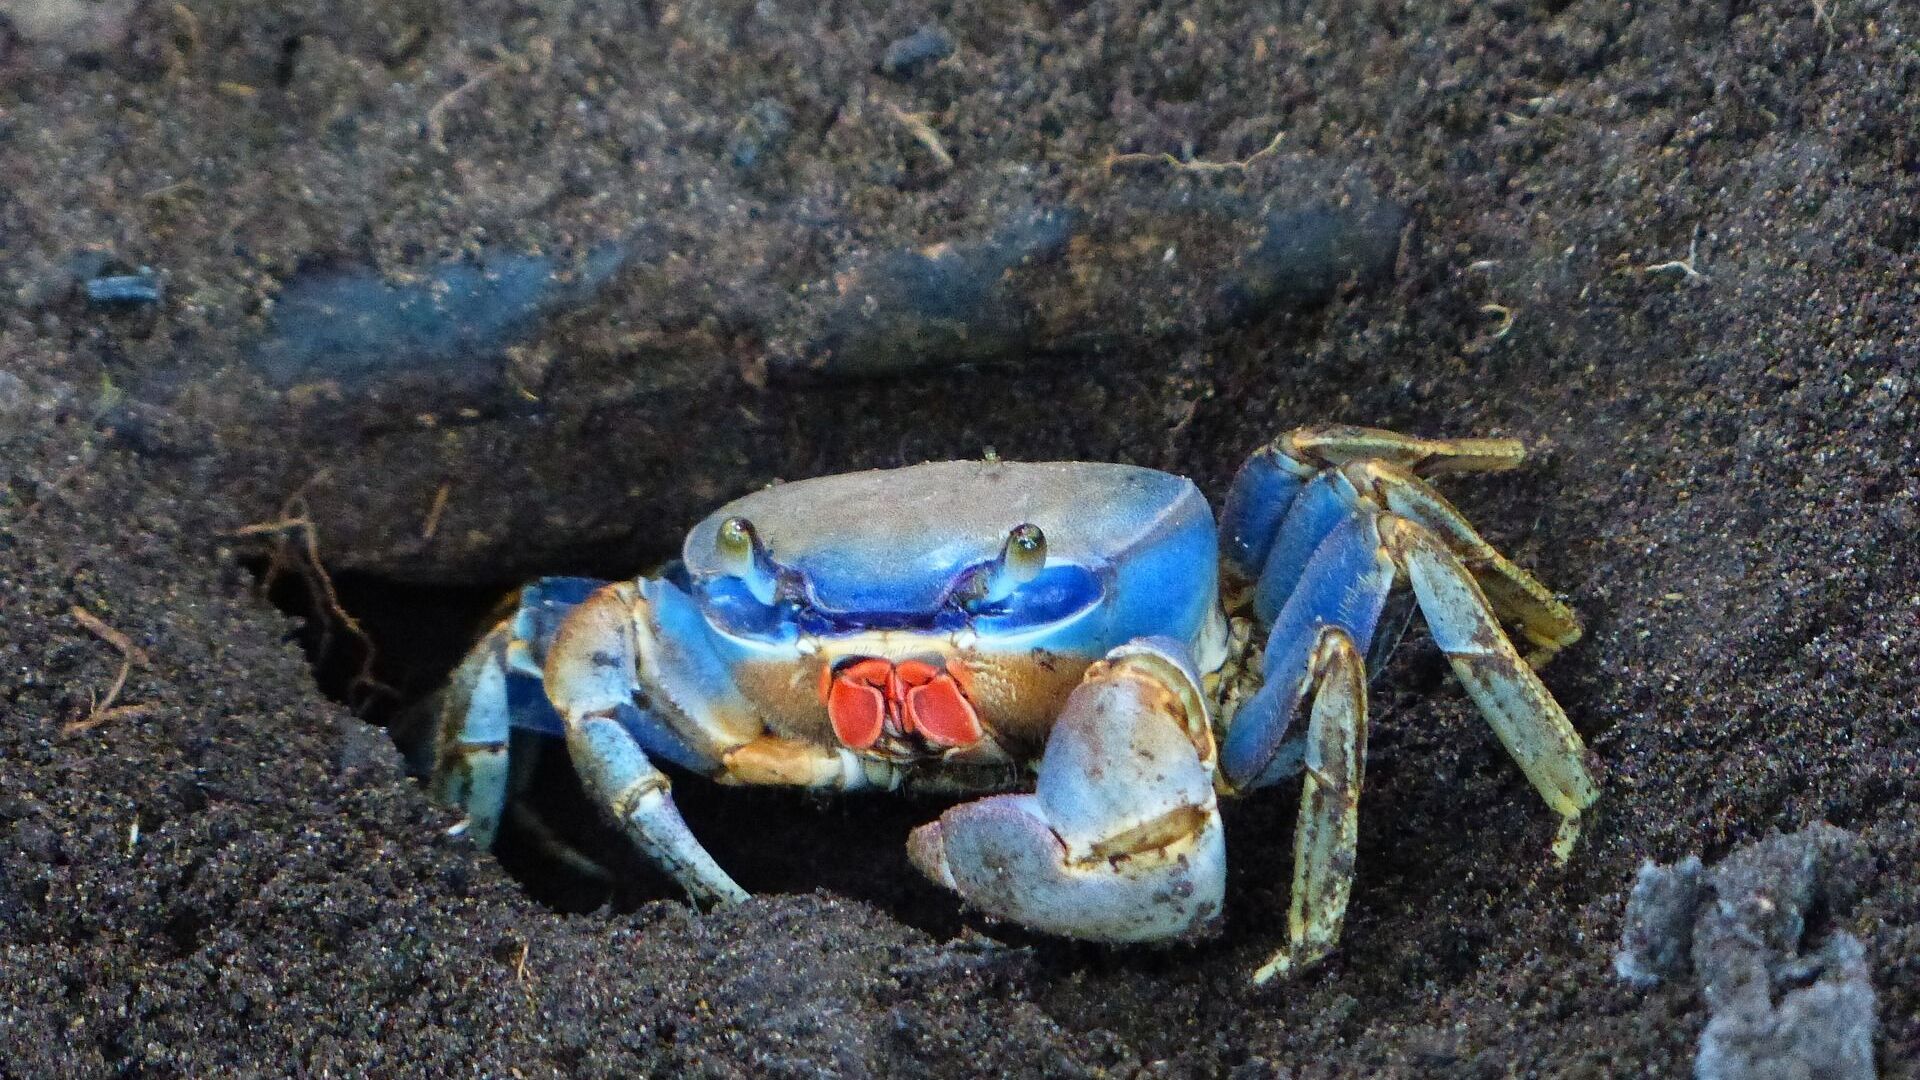 Man Eats Crab Whole to Get 'Revenge' for Pinching His Daughter